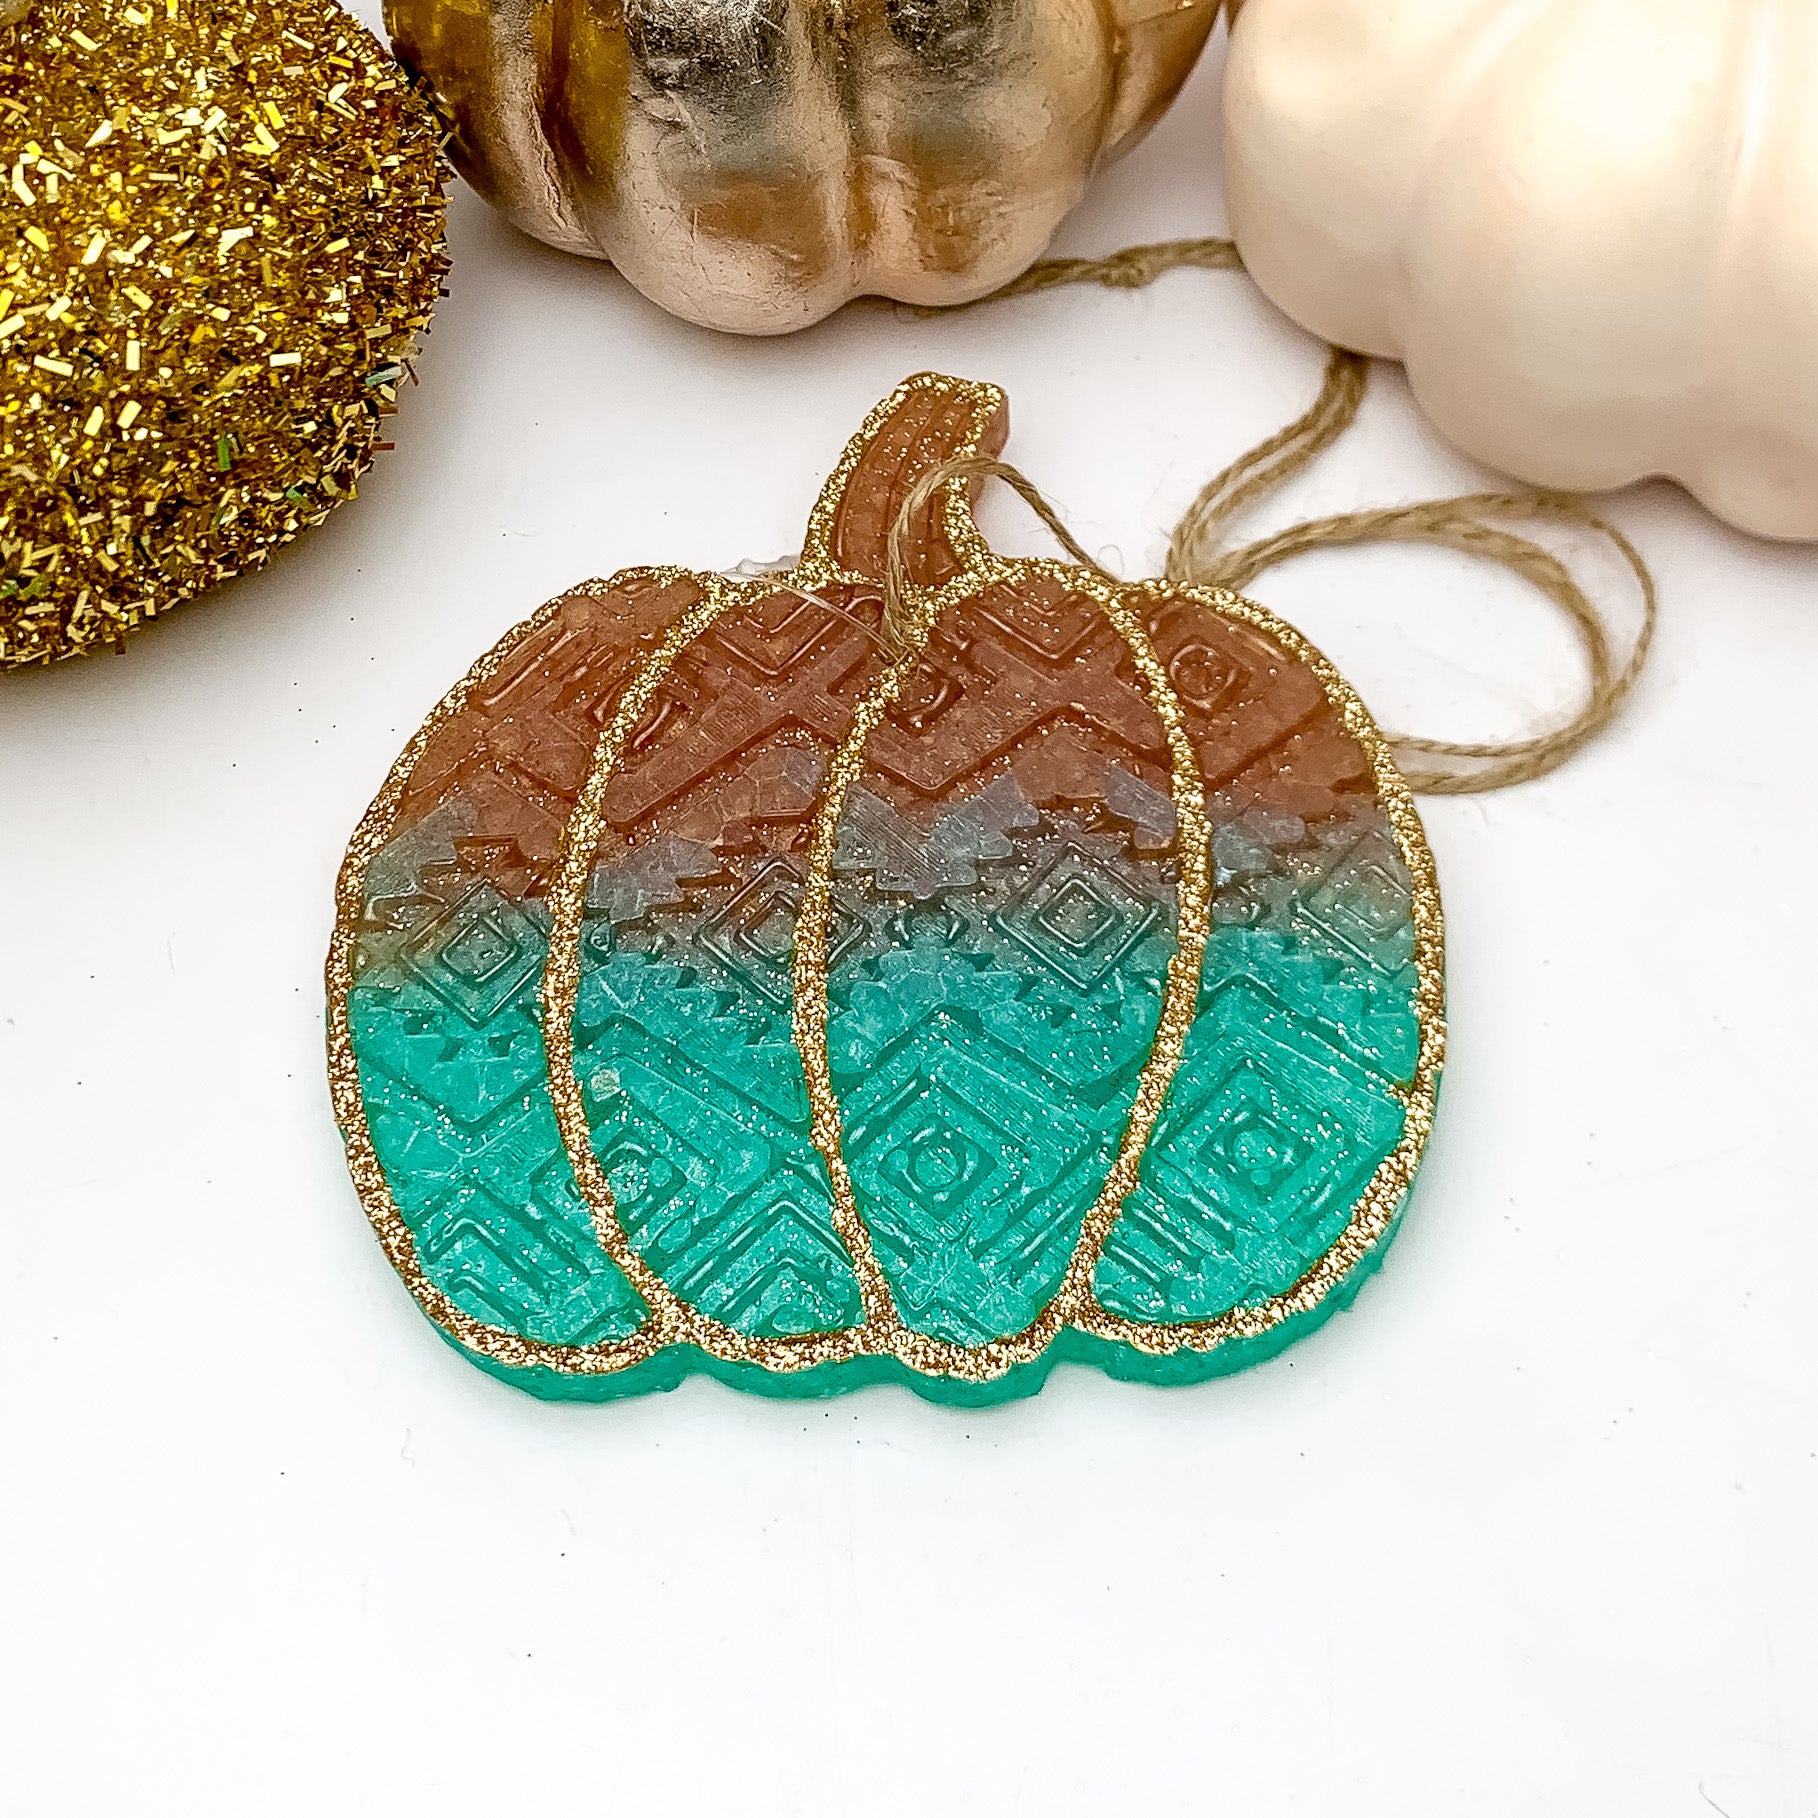 Ombre Pumpkin Freshie in Creme Brulee - Giddy Up Glamour Boutique